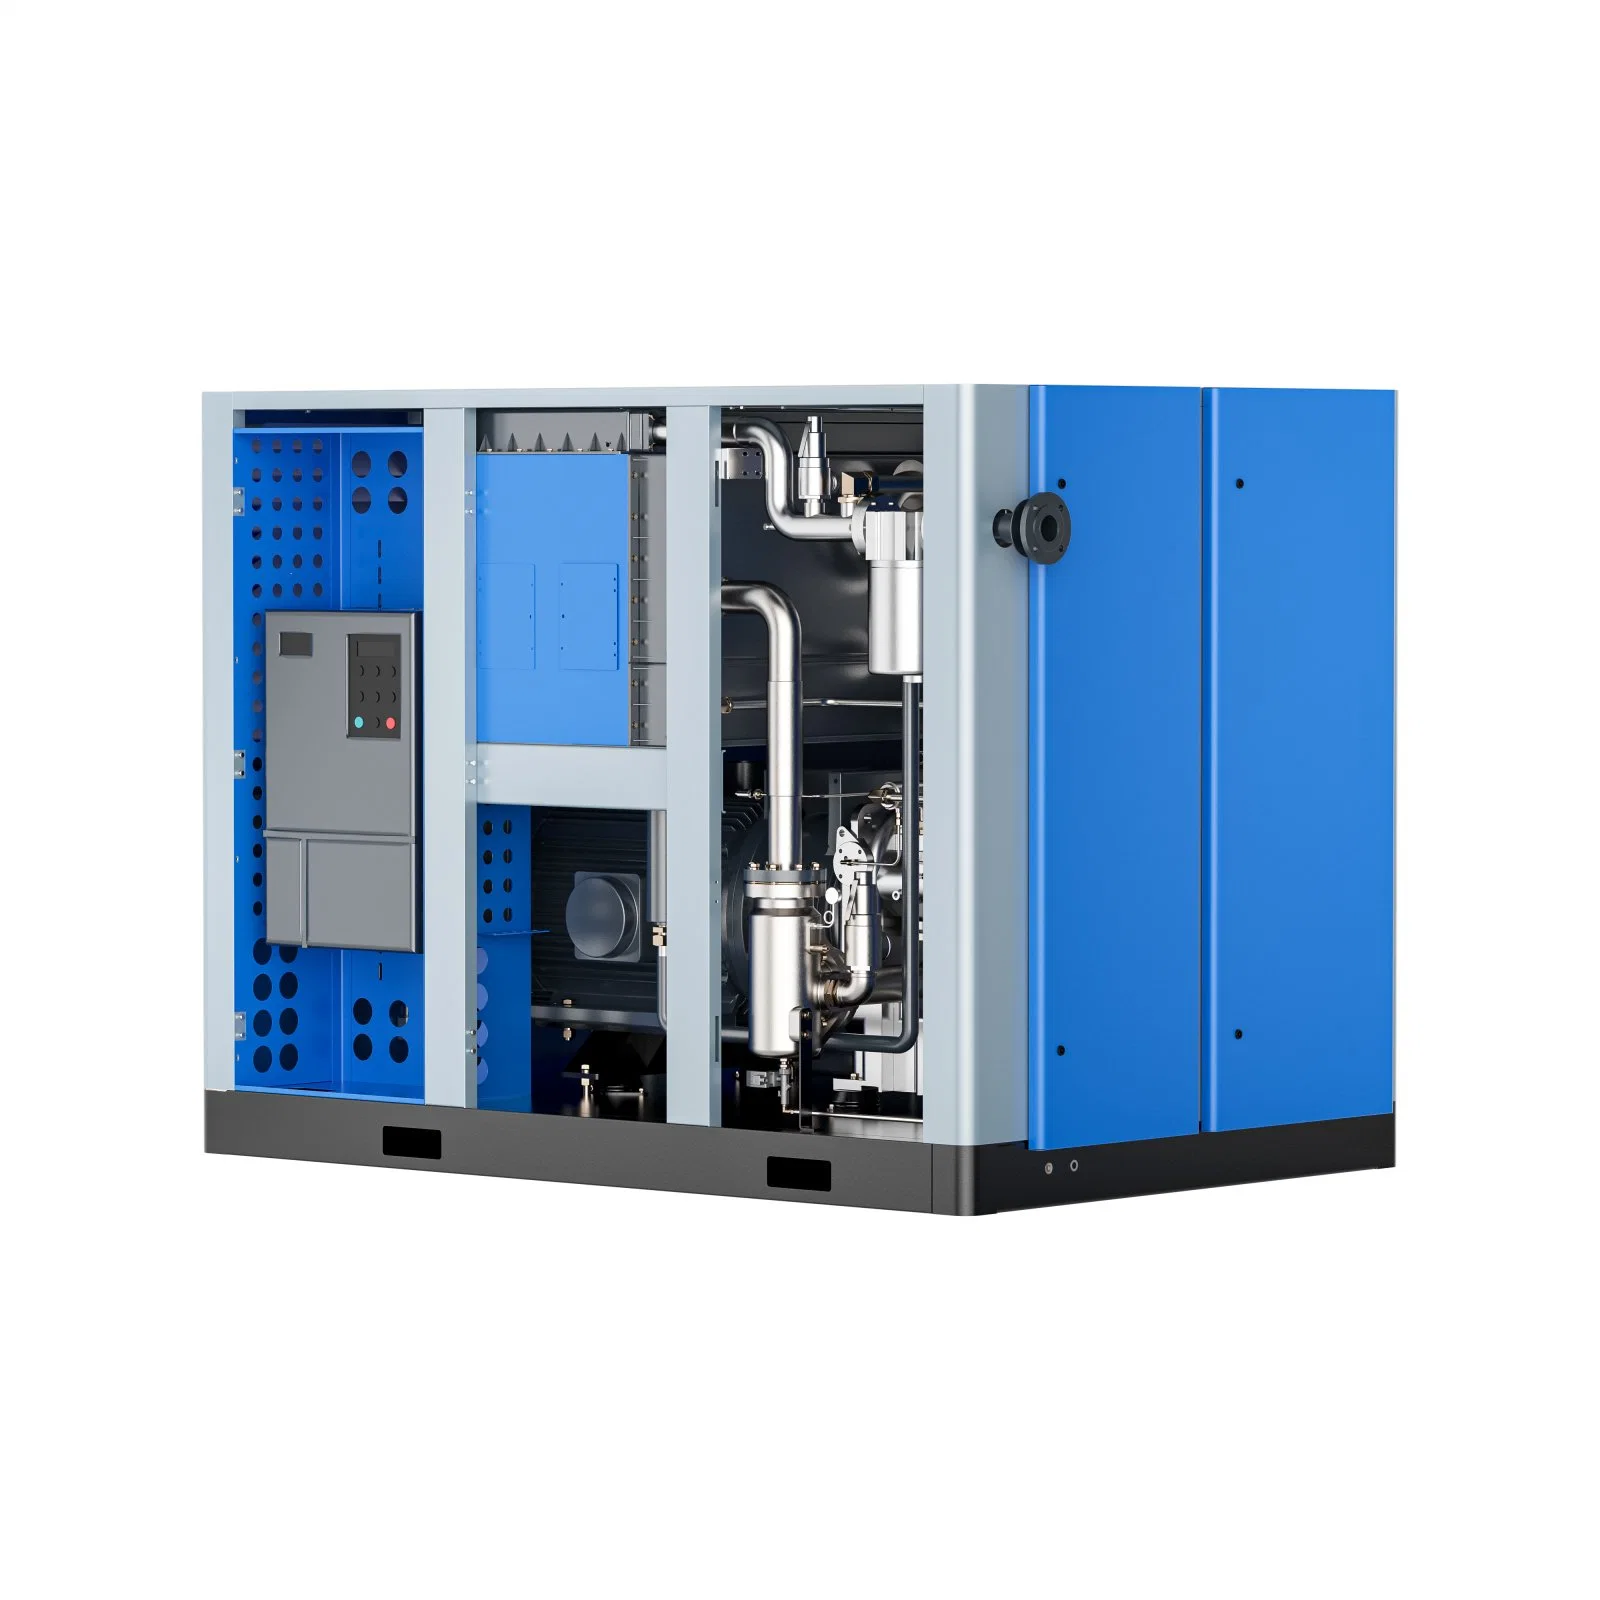 (SCR75G Series) Hot Sale Oil Free Screw Air Compressor German Technology Direct Driven 7bar to 12.5bar Rotary Industrial High Performance